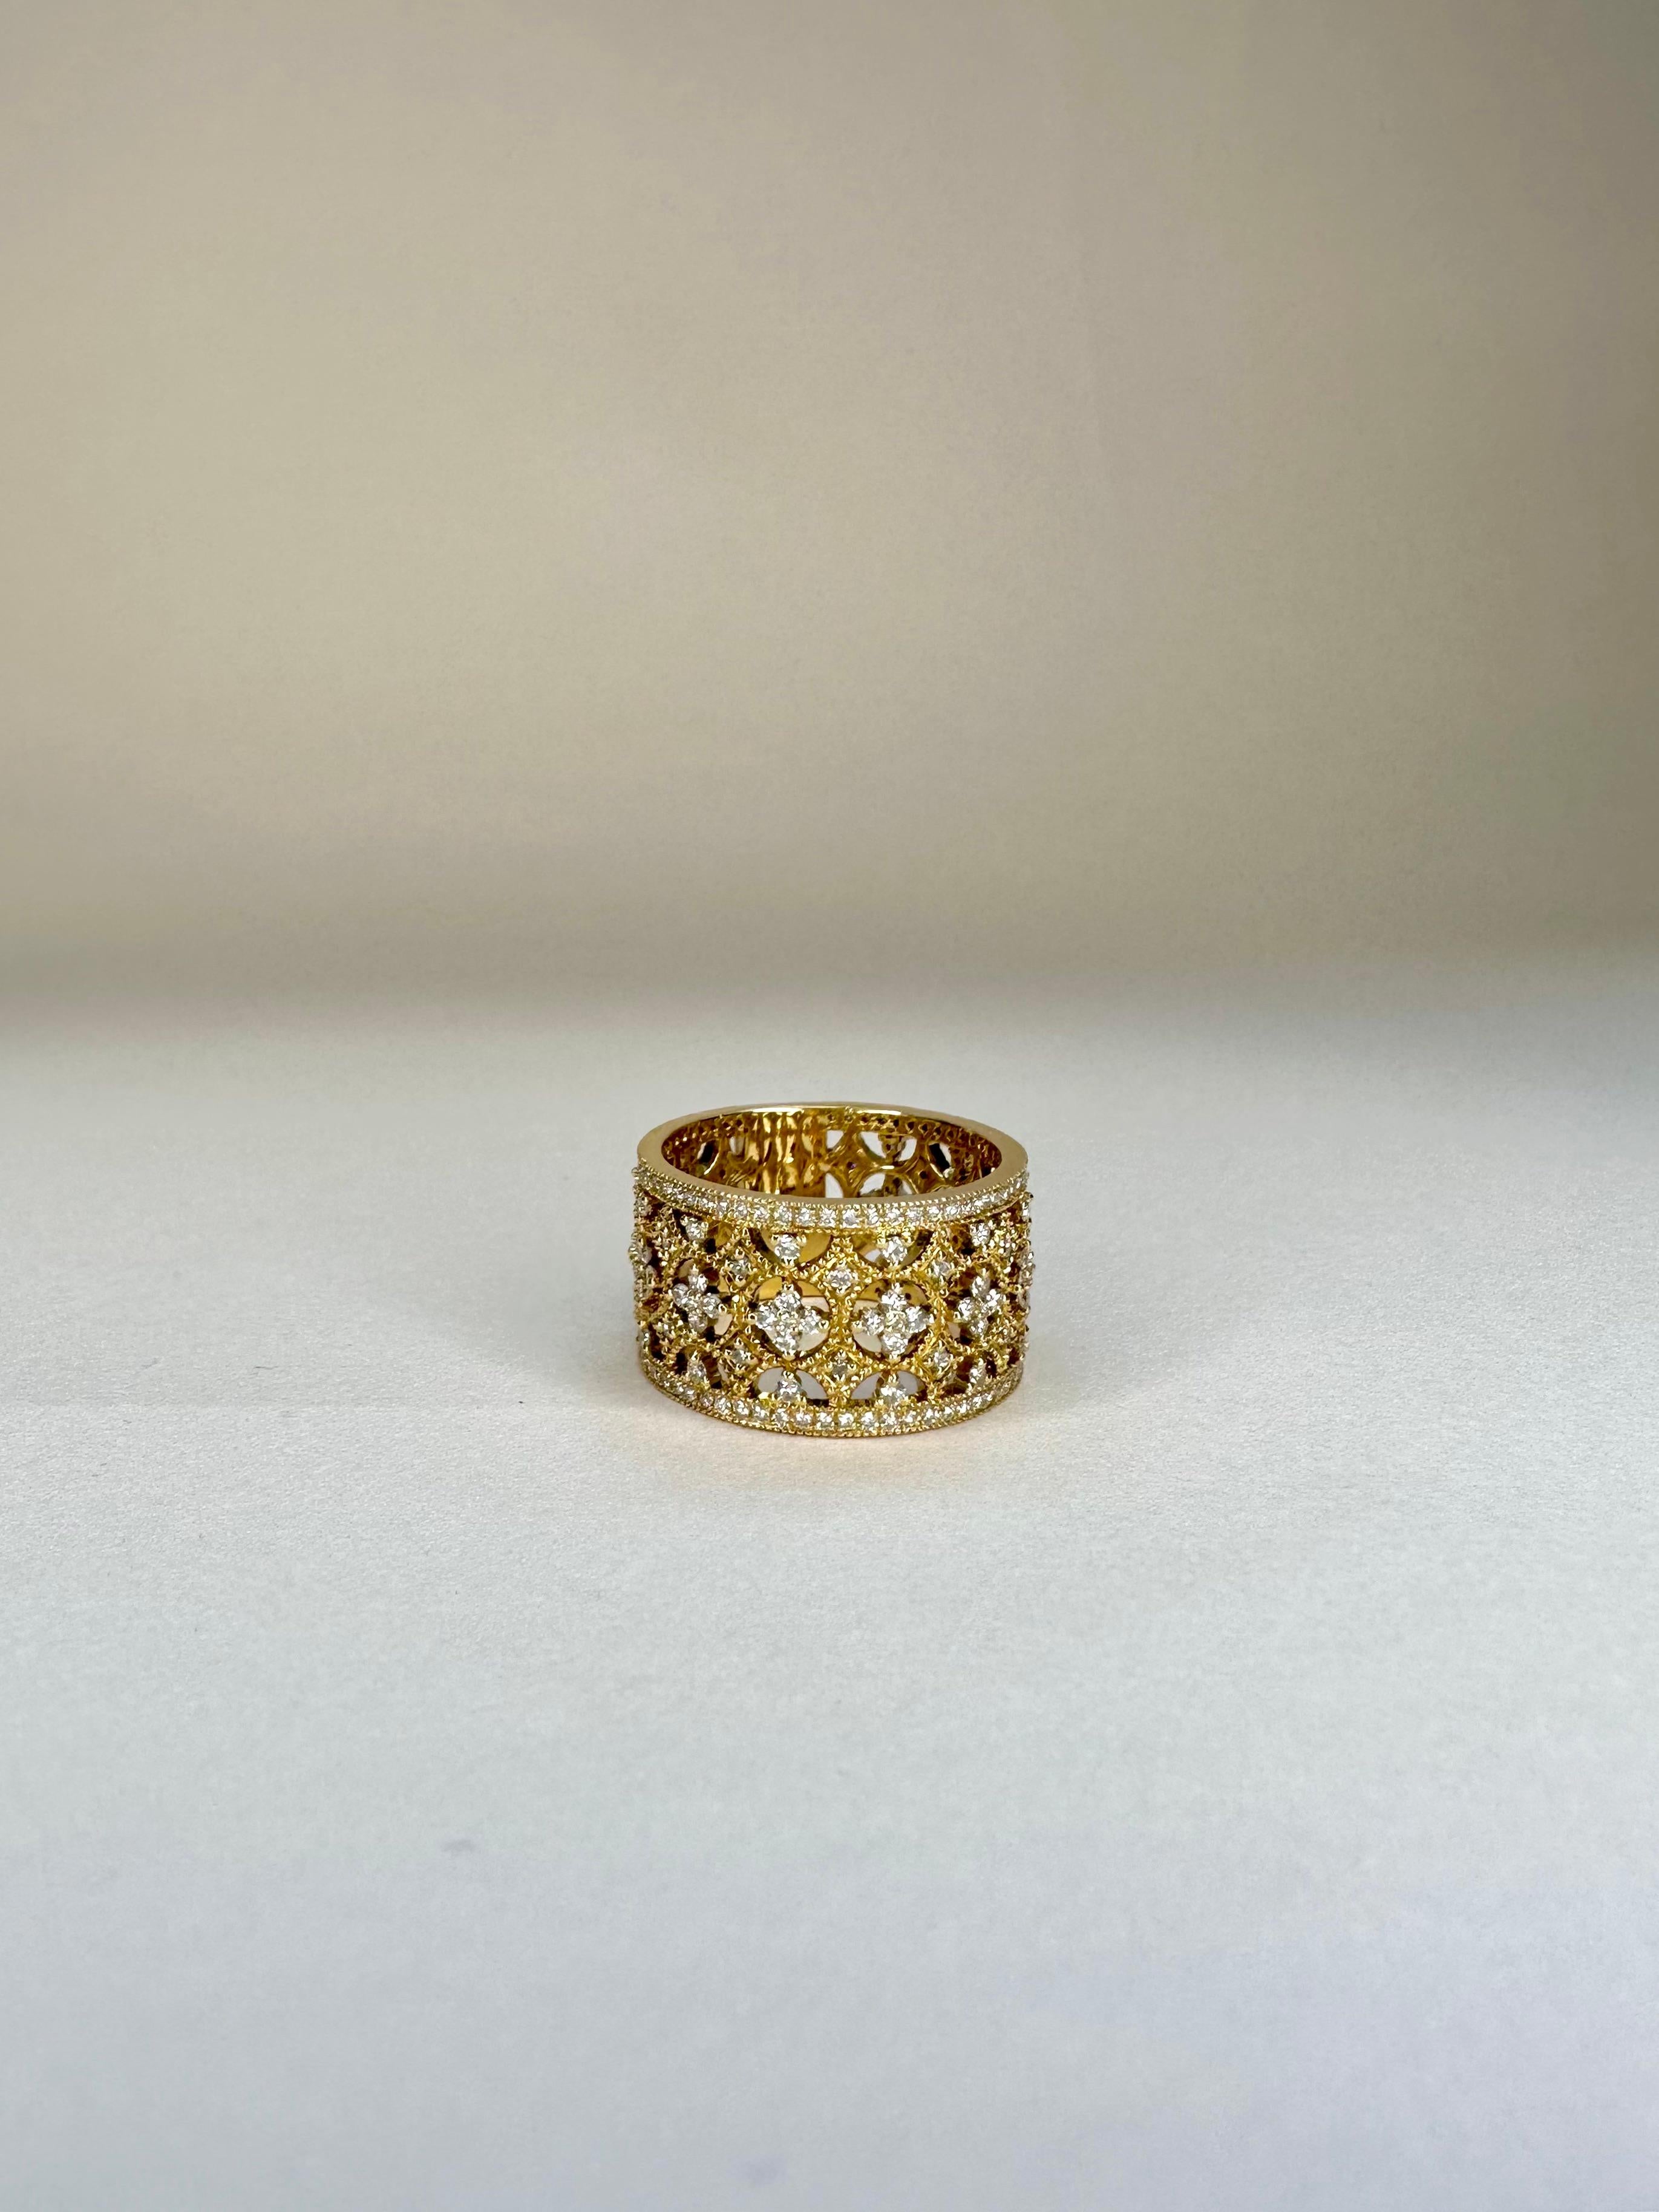 For Sale:  18k Yellow Gold Lace Band Ring 1.16 Cts Of Diamonds Milgrain Setting 4